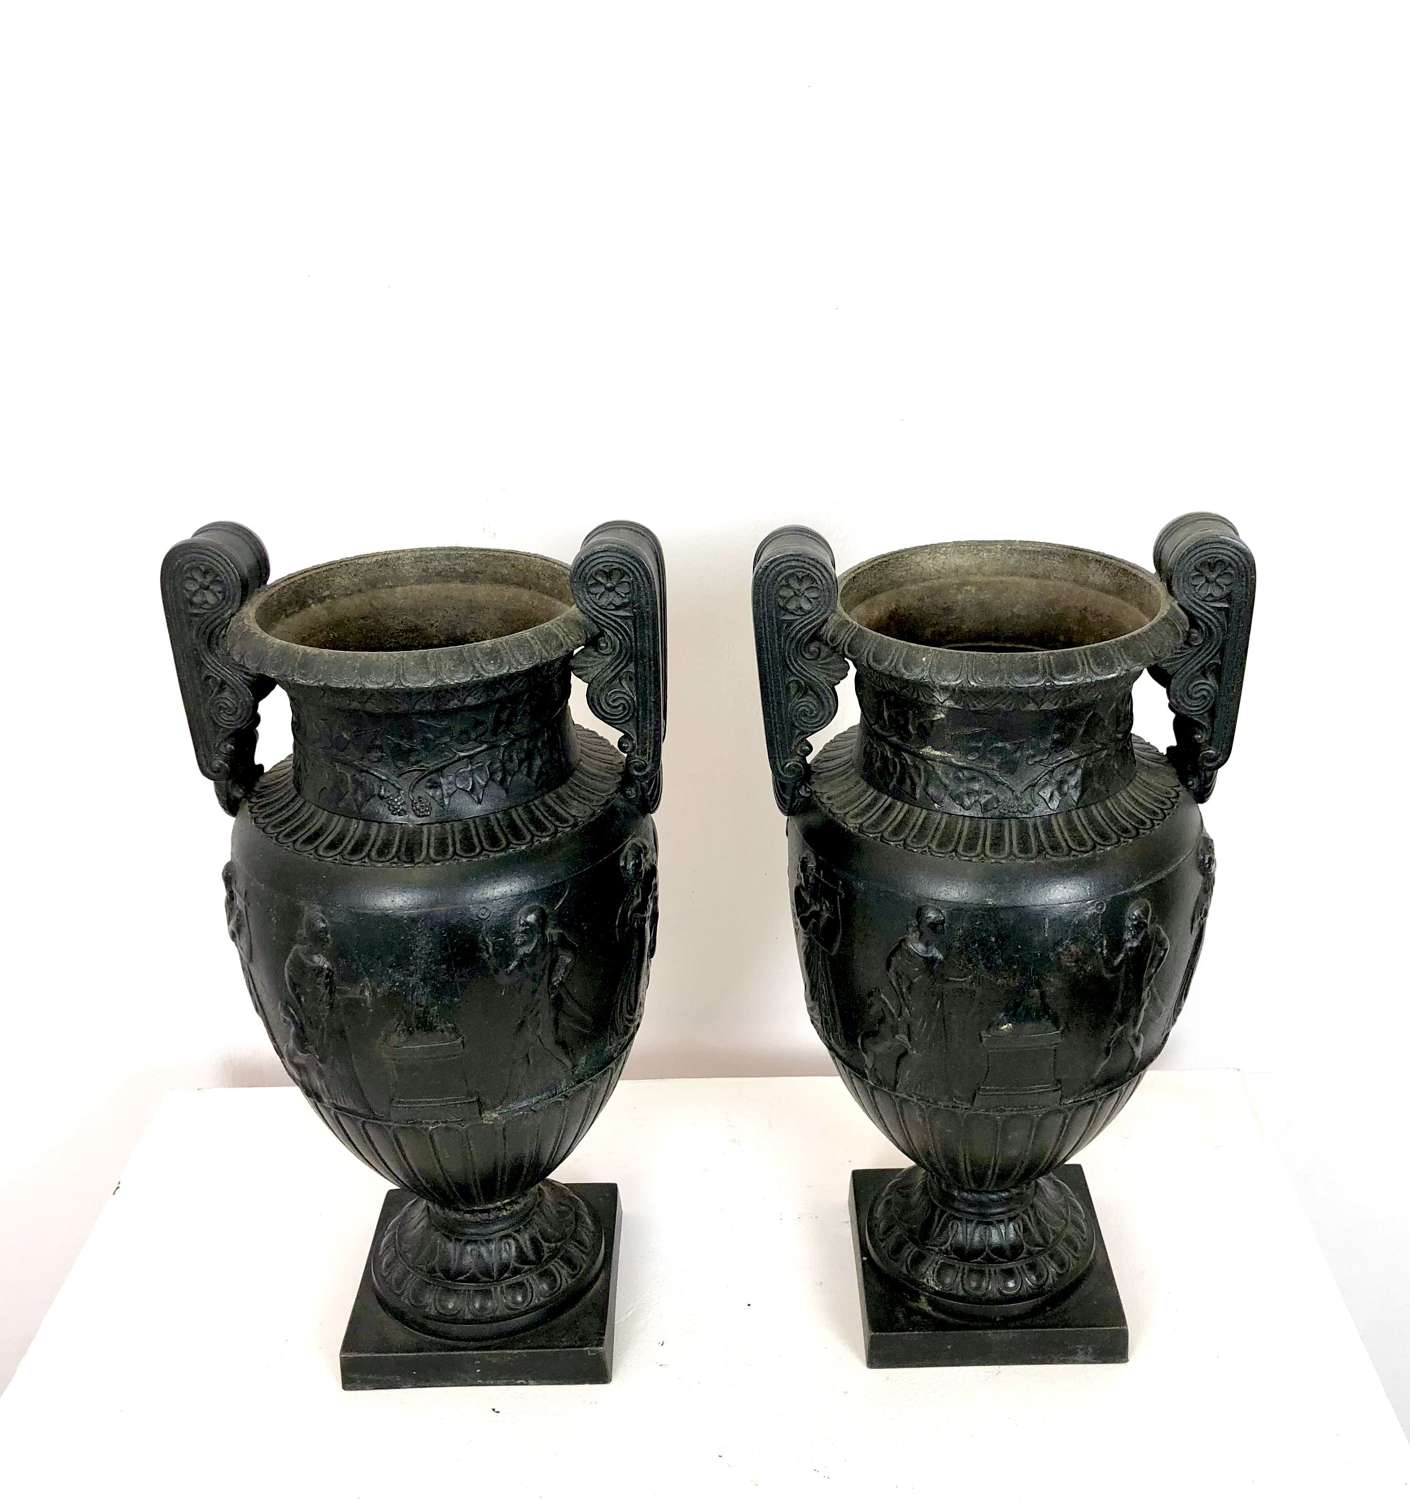 A pair of neoclassical urns